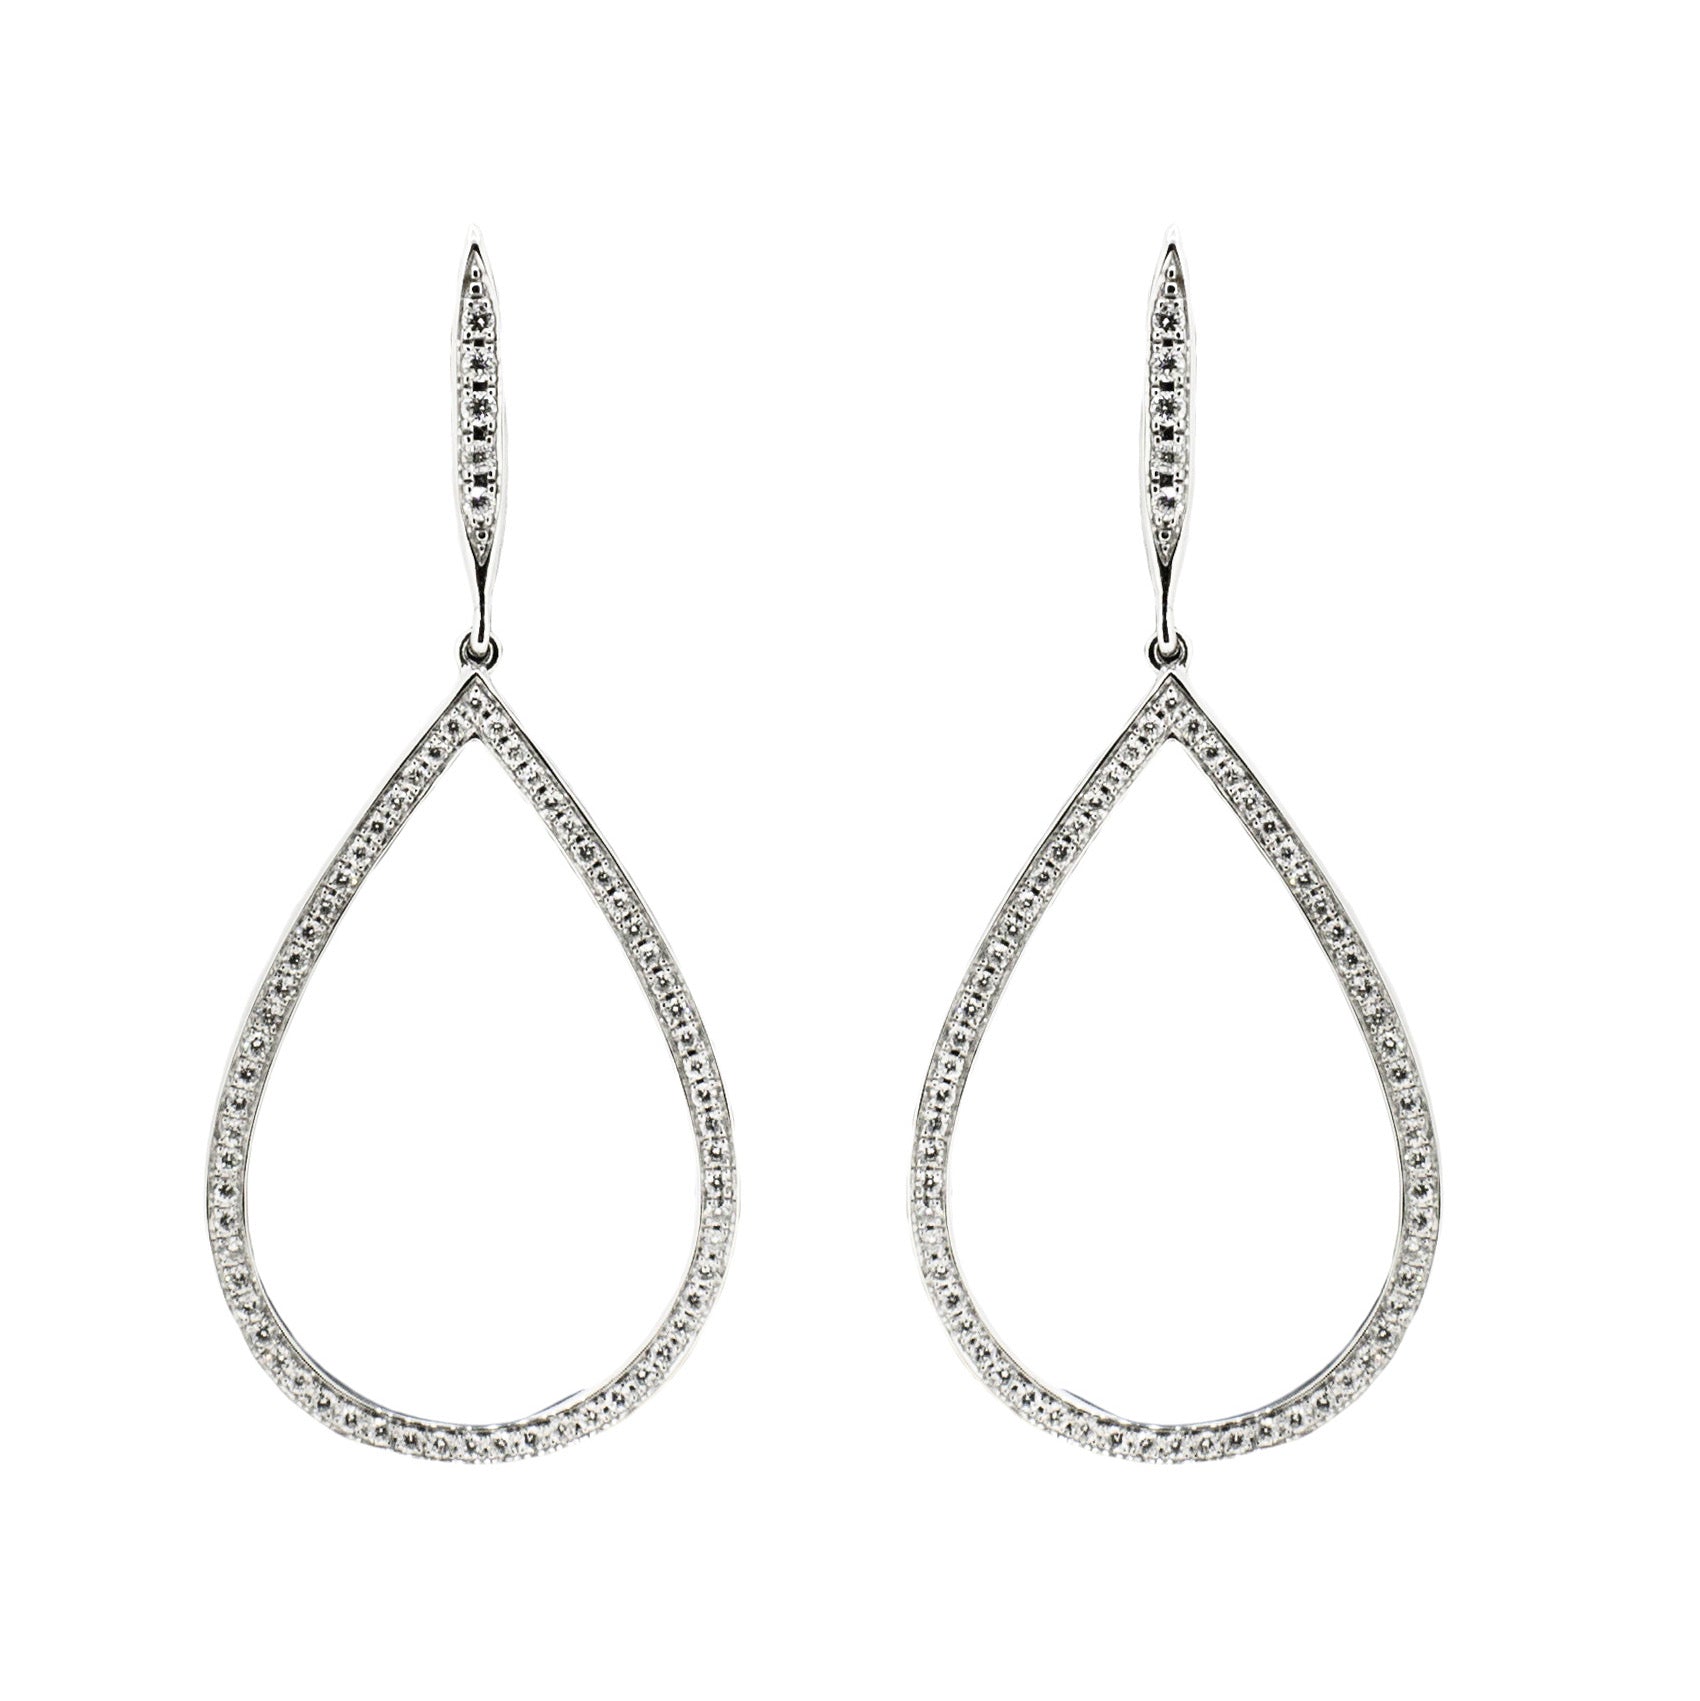 White Gold and Diamond Pear Shaped Earrings